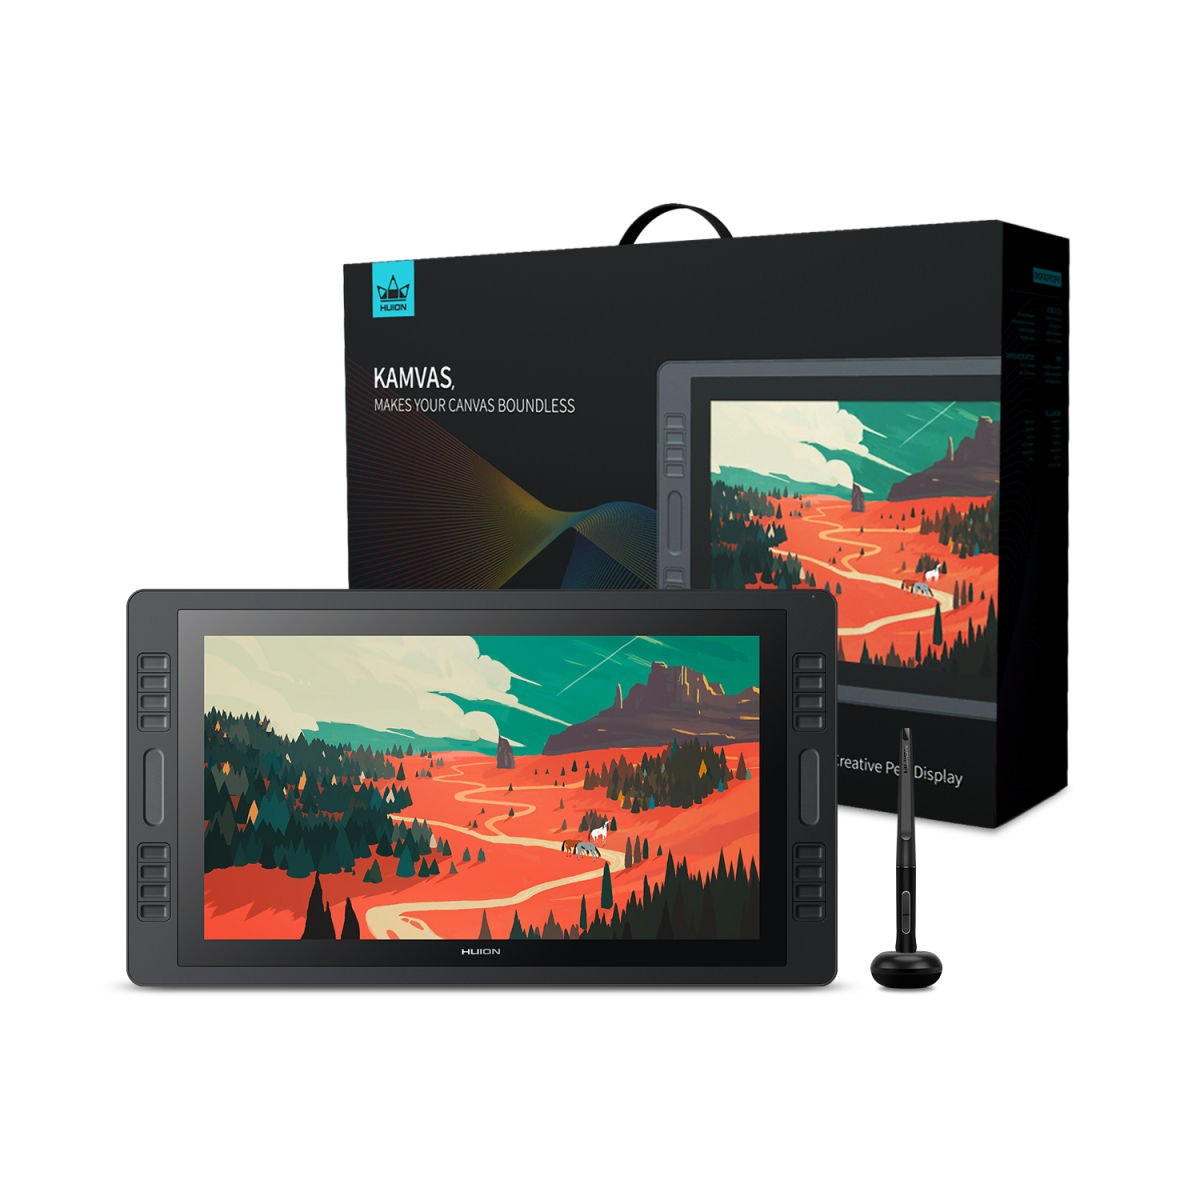 Kamvas Pro 20 (2019) 19.1-inch Graphic Monitor | Huion Official Store:  Drawing Tablets, Pen Tablets, Pen Display, Led Light Pad